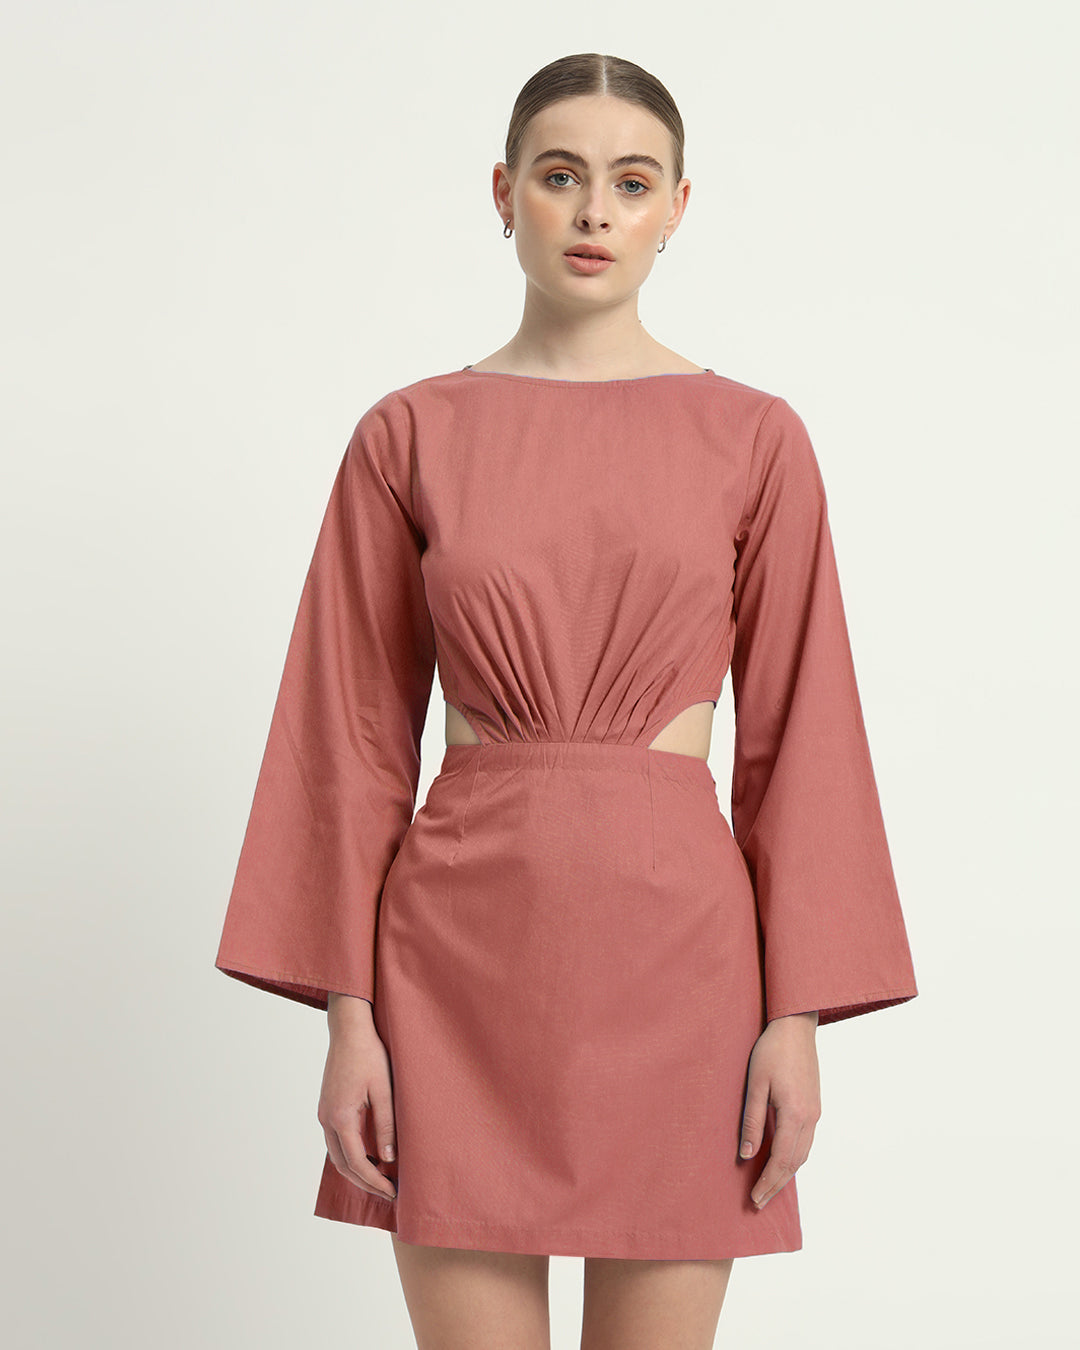 The Ivory Pink Eloy Cotton Dress